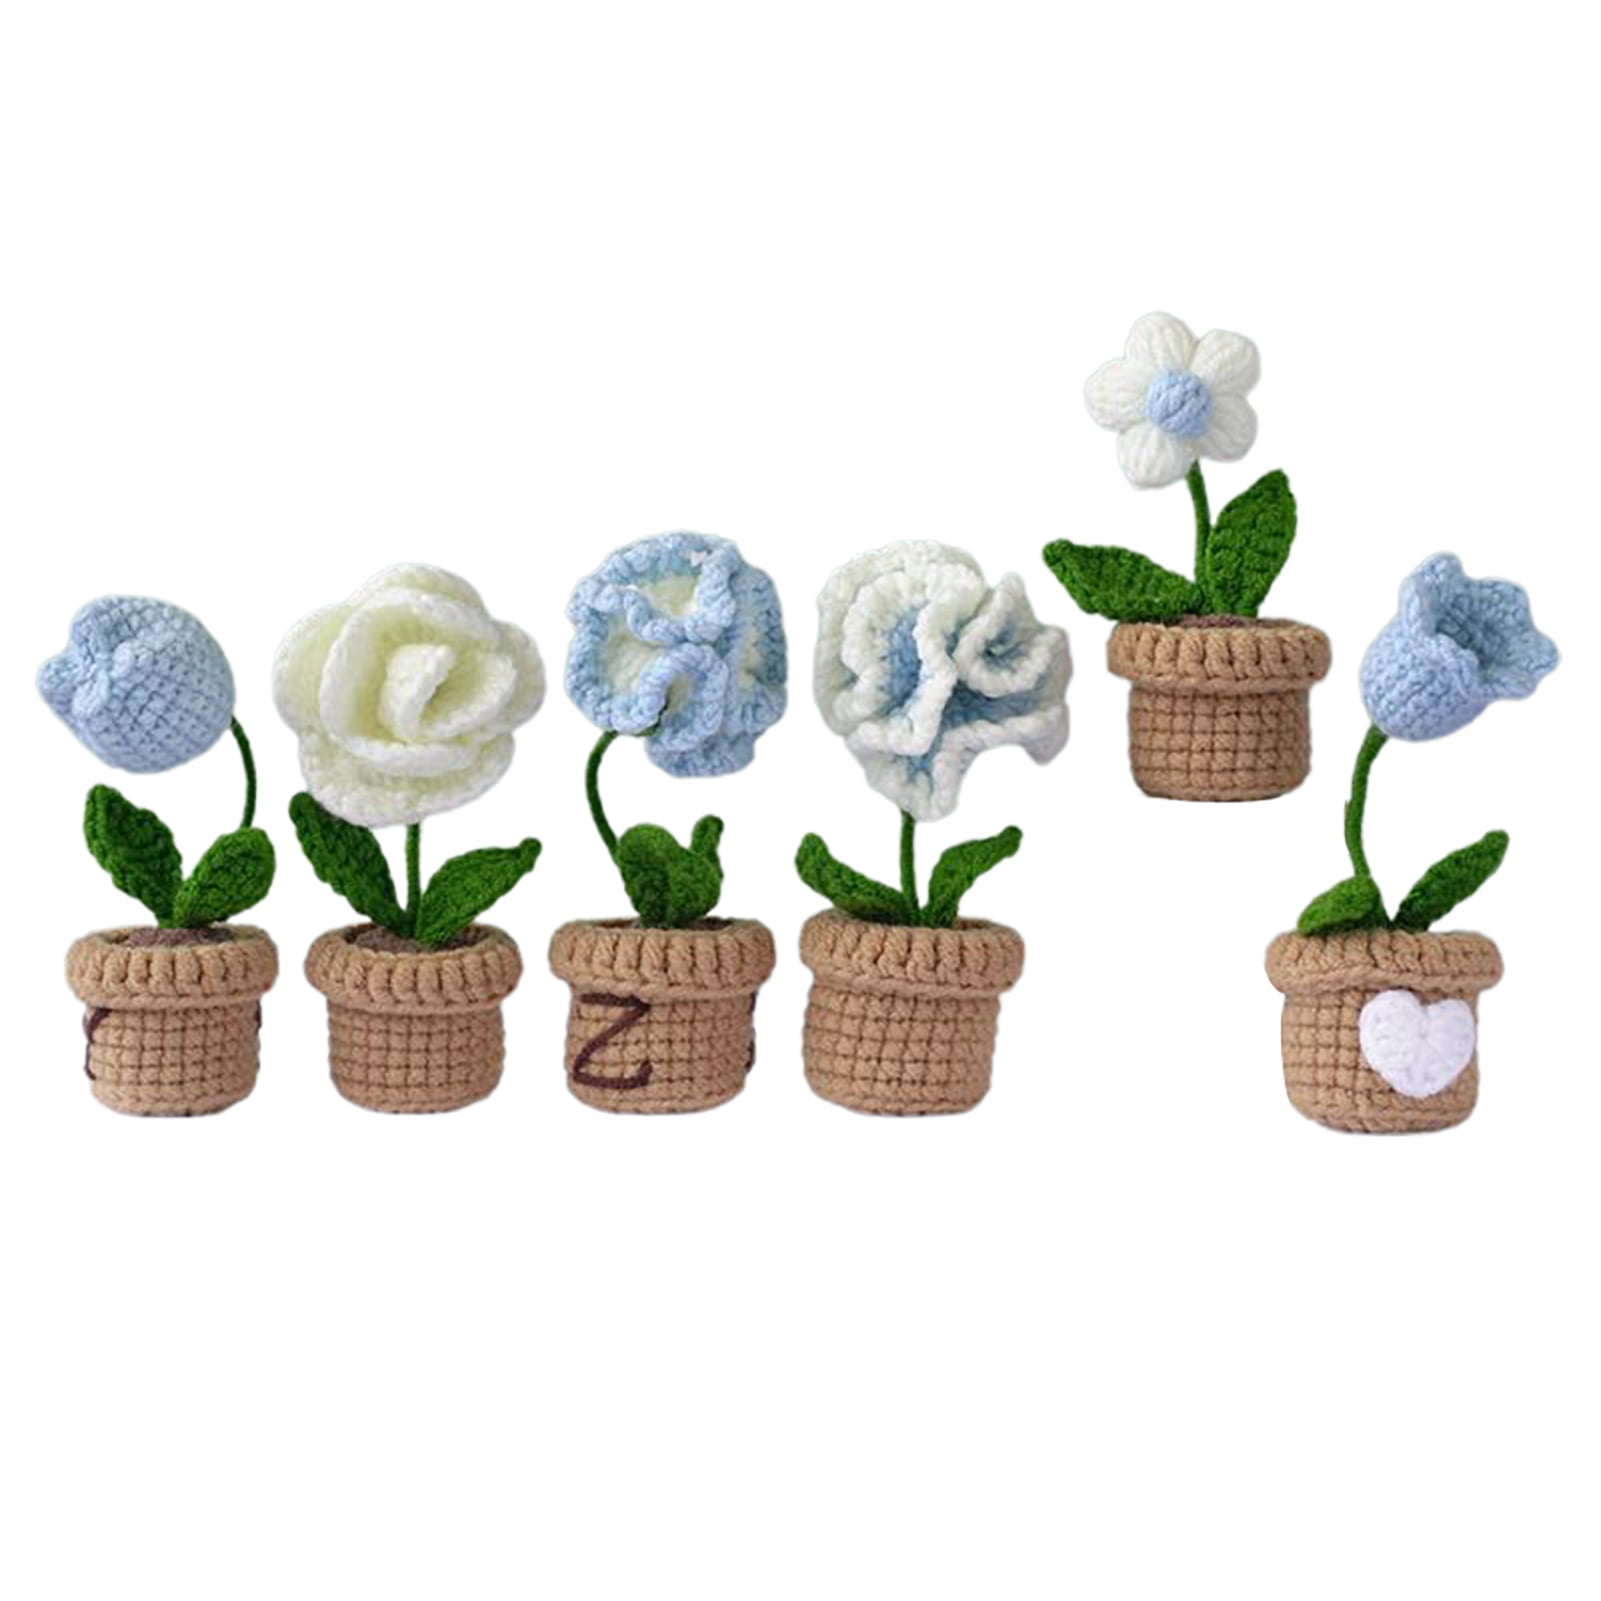  One Piece Potted Blue Rose Beginners Crochet Kit